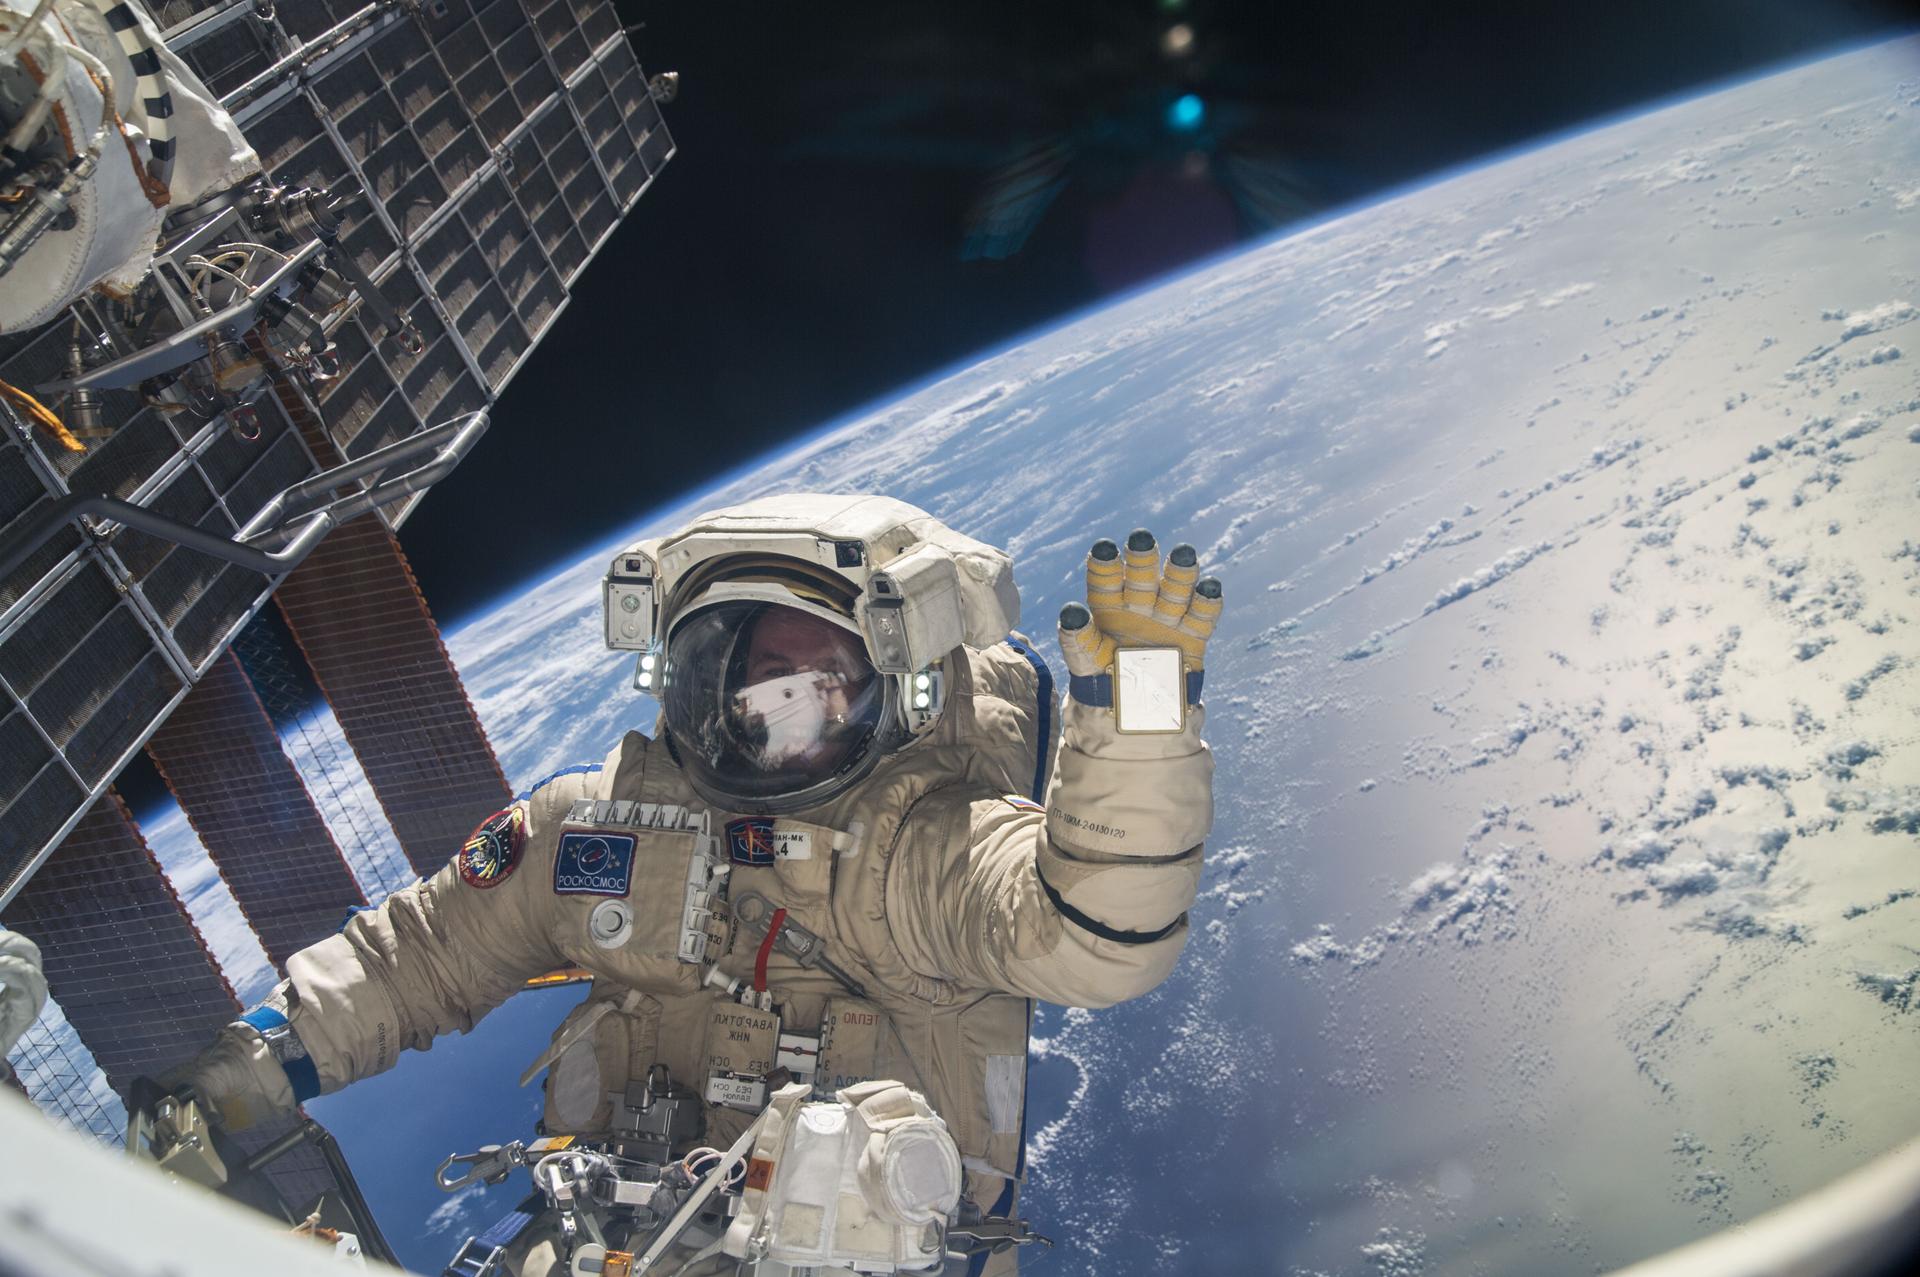 Russian cosmonaut Sergey Ryazanskiy, is pictured during a session of extravehicular activity (EVA) in support of assembly and maintenance on the International Space Station.